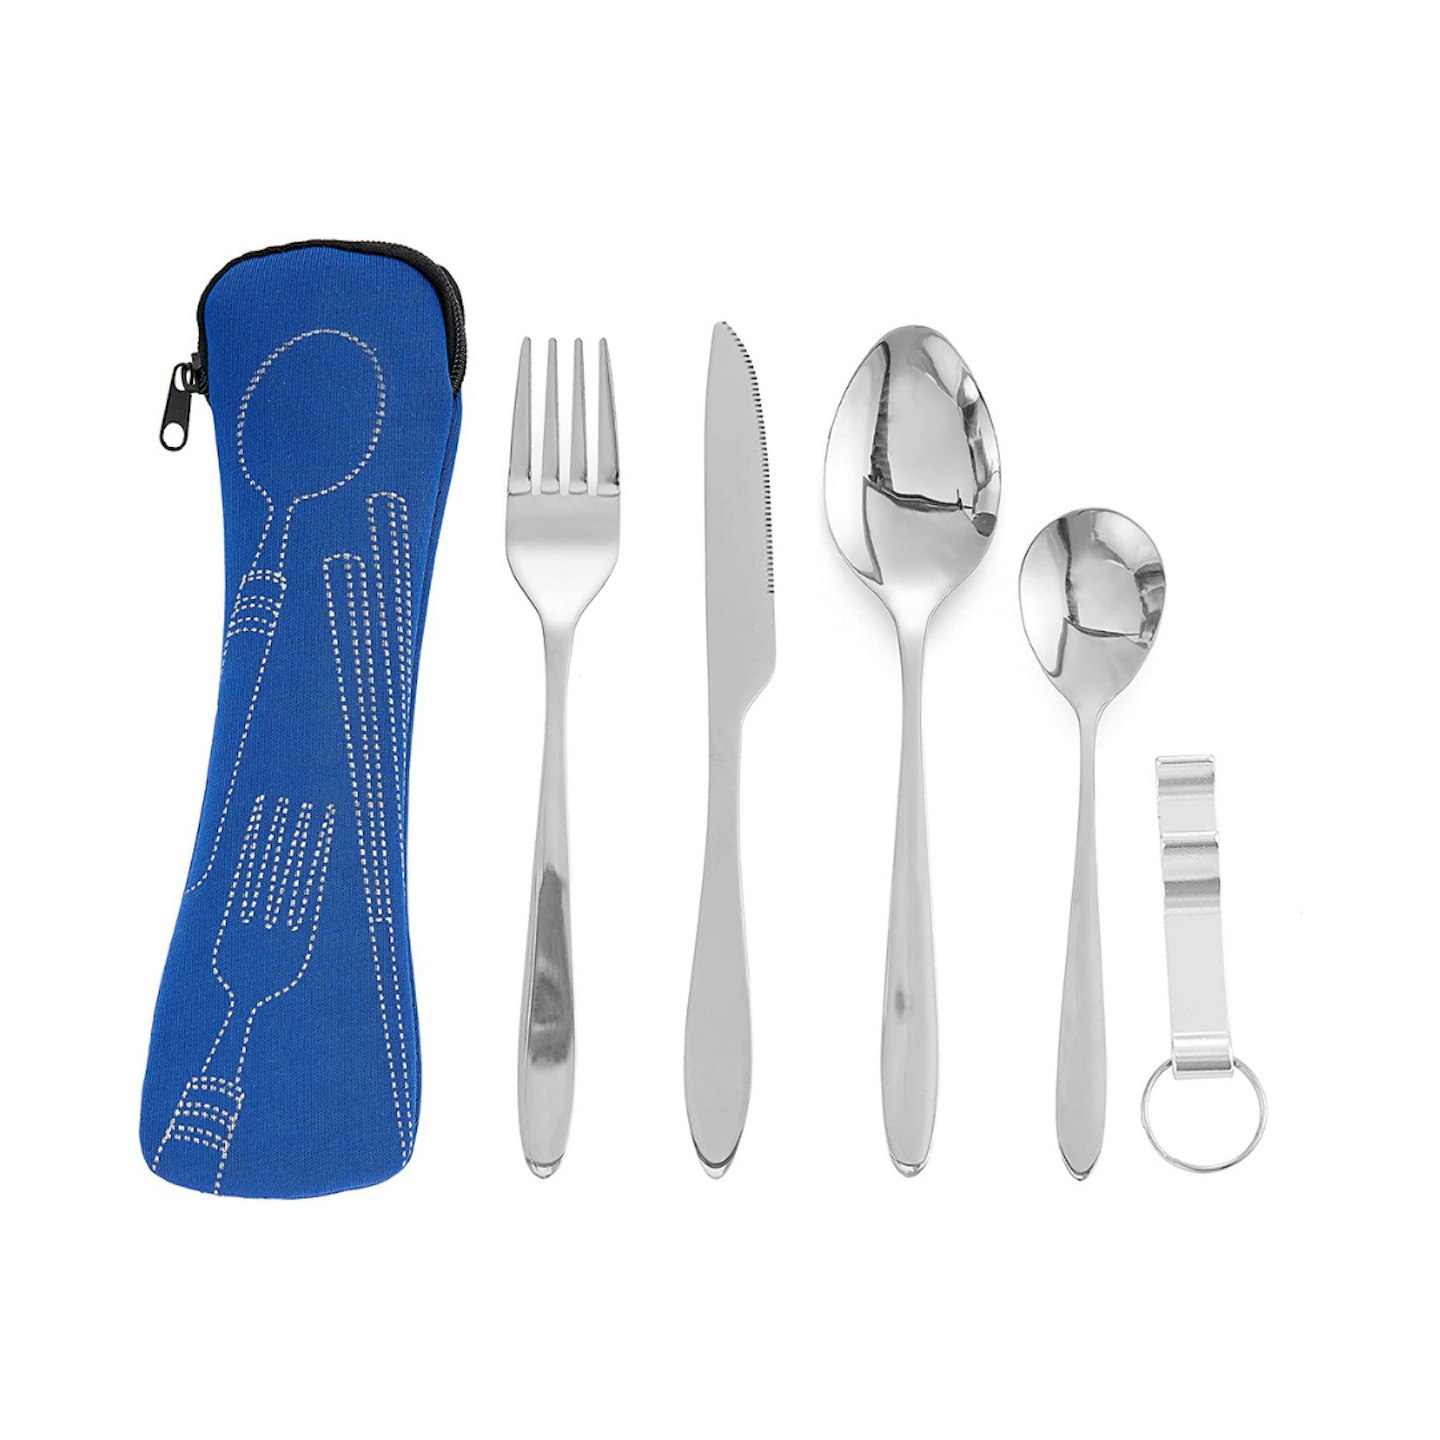 5 Pcs Premium Stainless-Steel Camping Cutlery Set